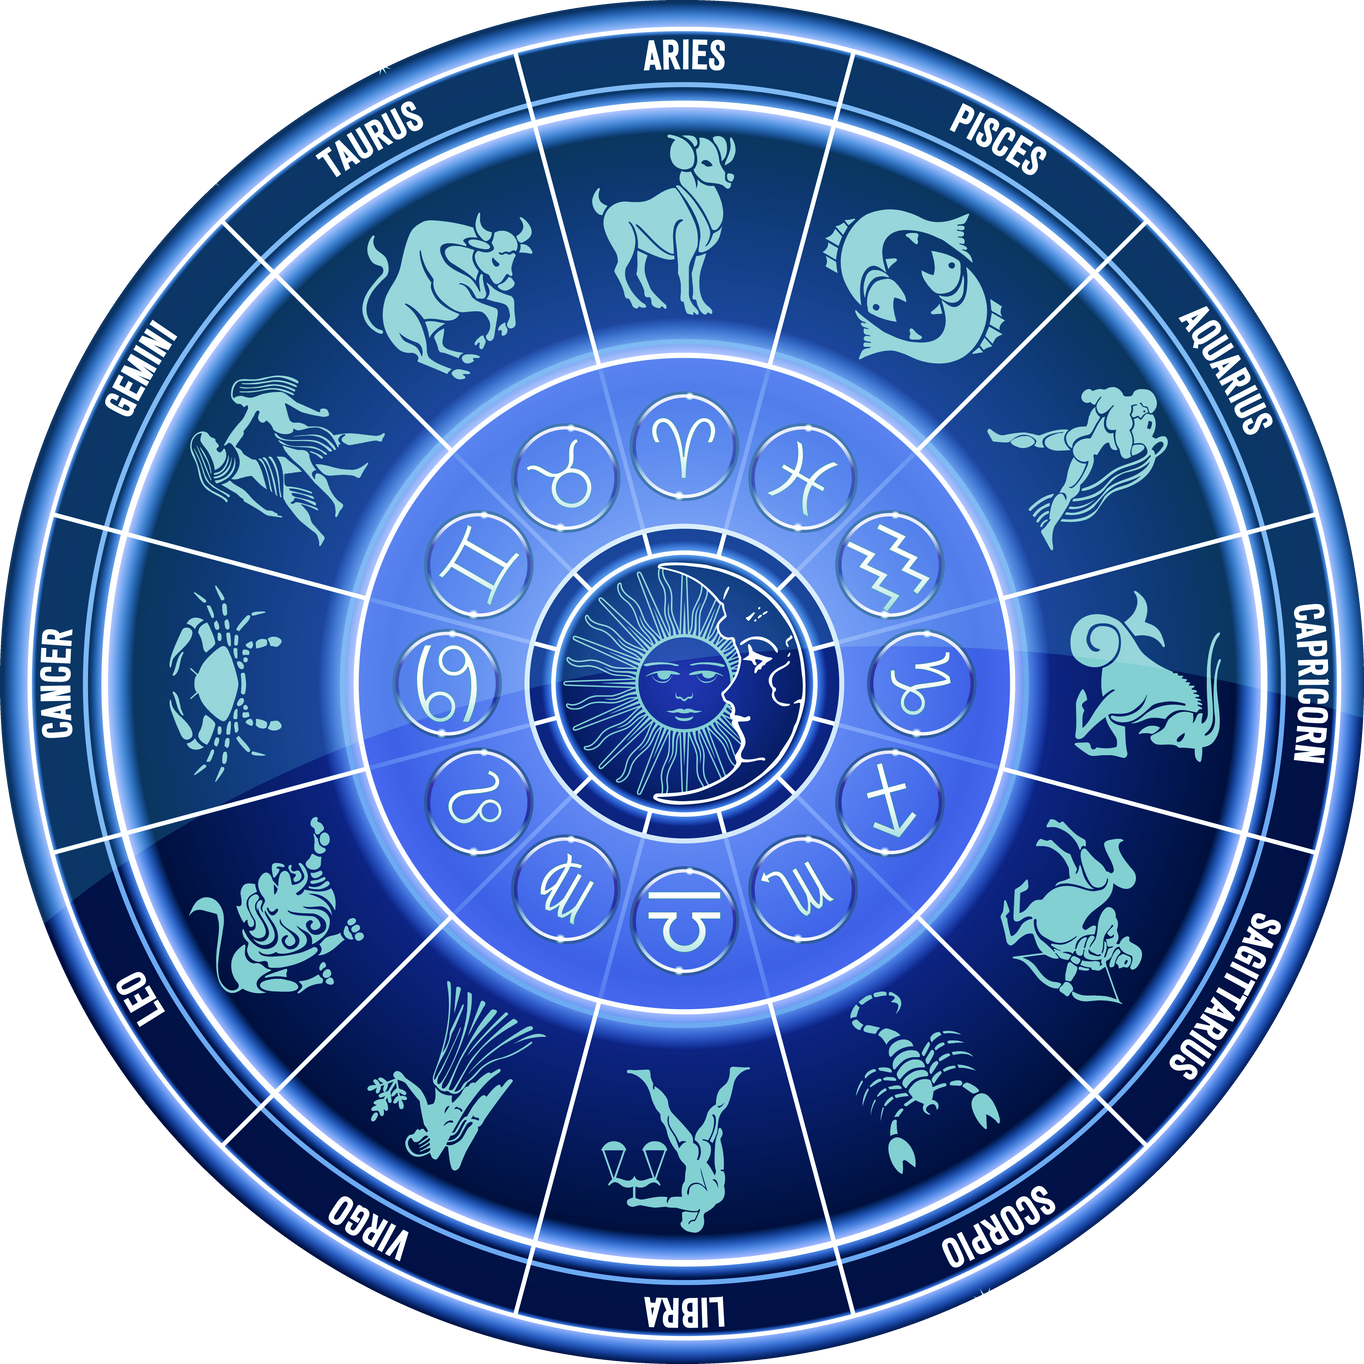 Composition of Astrology Symbols